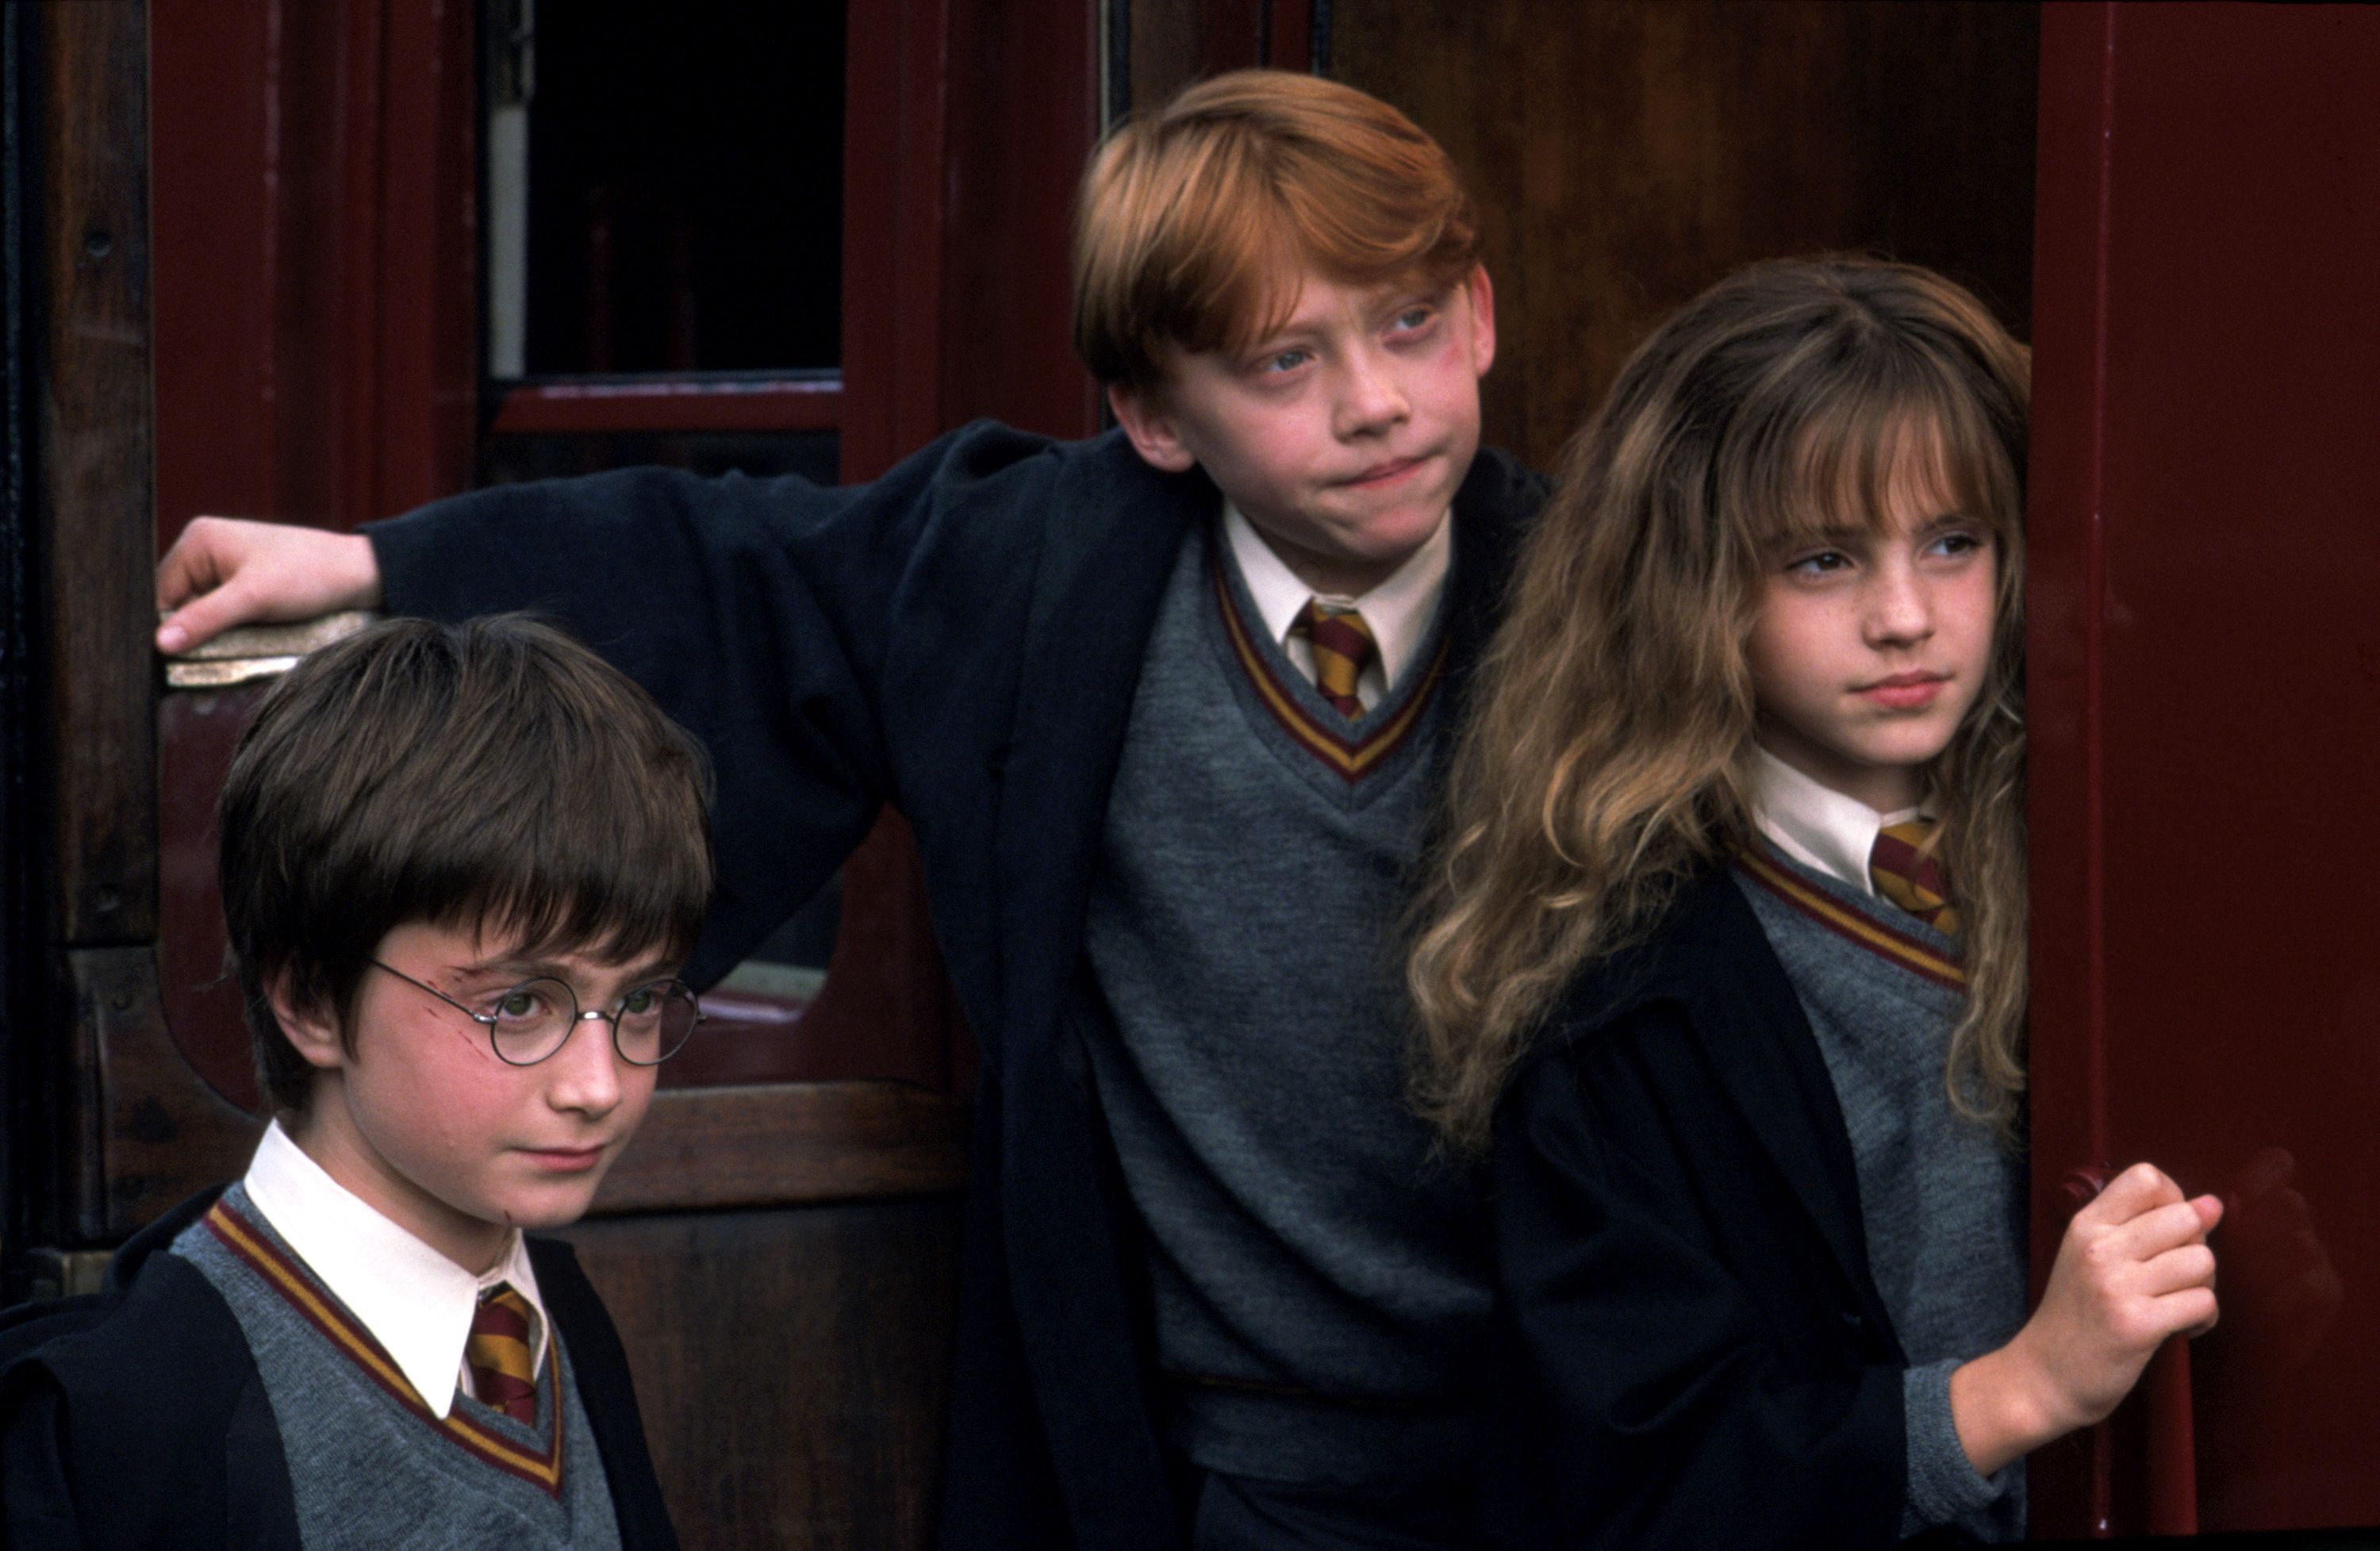 JK Rowling says Hermione should have married Harry Potter, not Ron